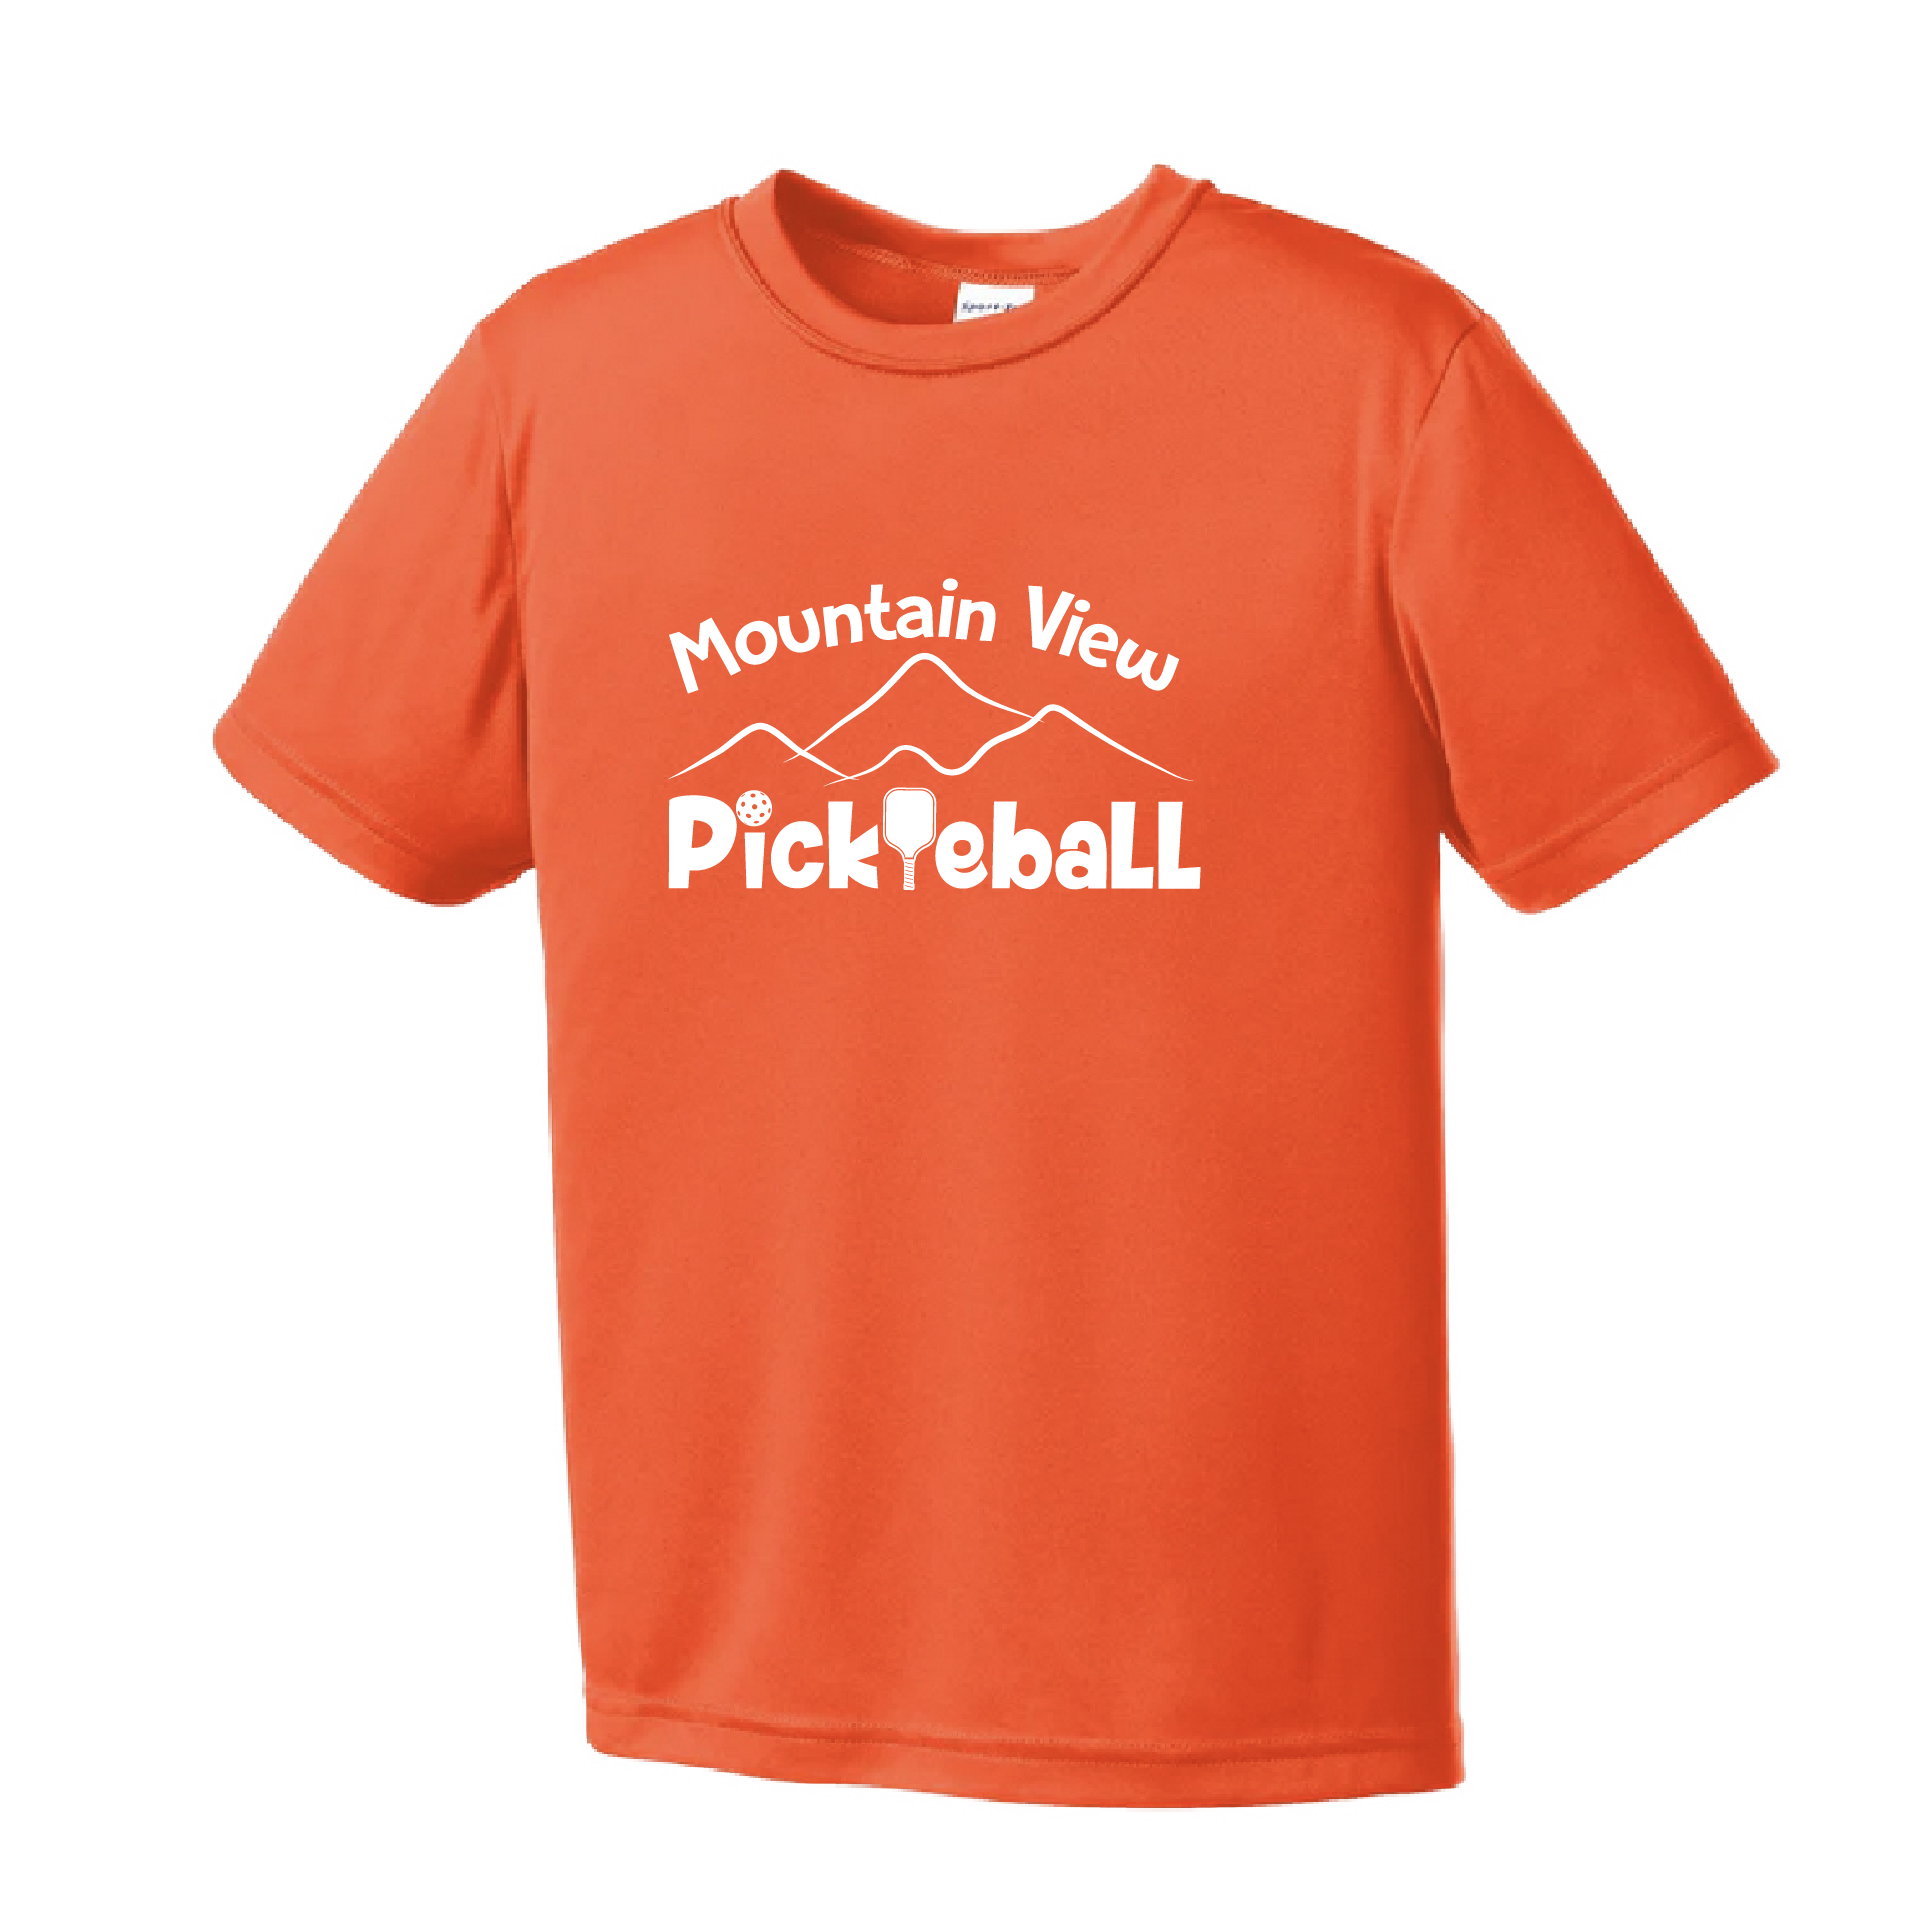 Pickleball Design: Mountain View Pickleball Club  Youth Styles: Short Sleeve  Shirt are lightweight, roomy and highly breathable. These moisture-wicking shirts are designed for athletic performance. They feature PosiCharge technology to lock in color and prevent logos from fading. Removable tag and set-in sleeves for comfort. 